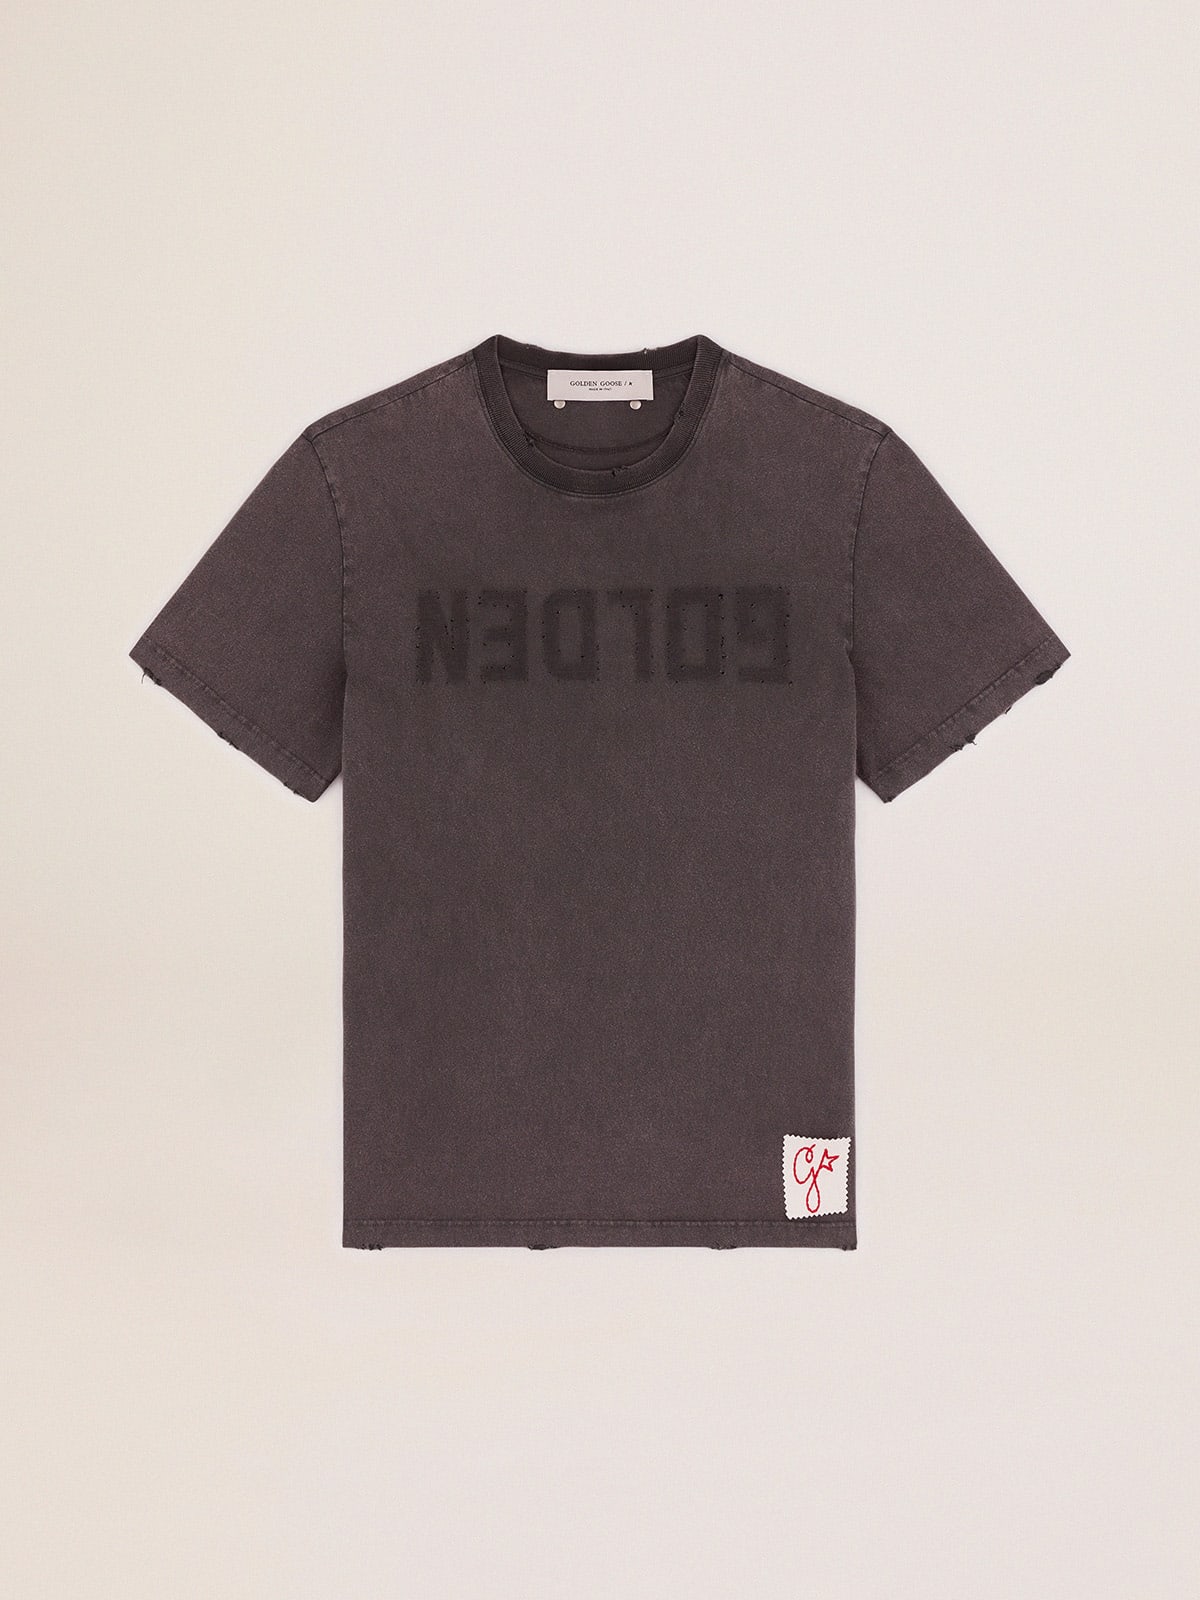 Golden Collection T-shirt in anthracite gray with a distressed treatment